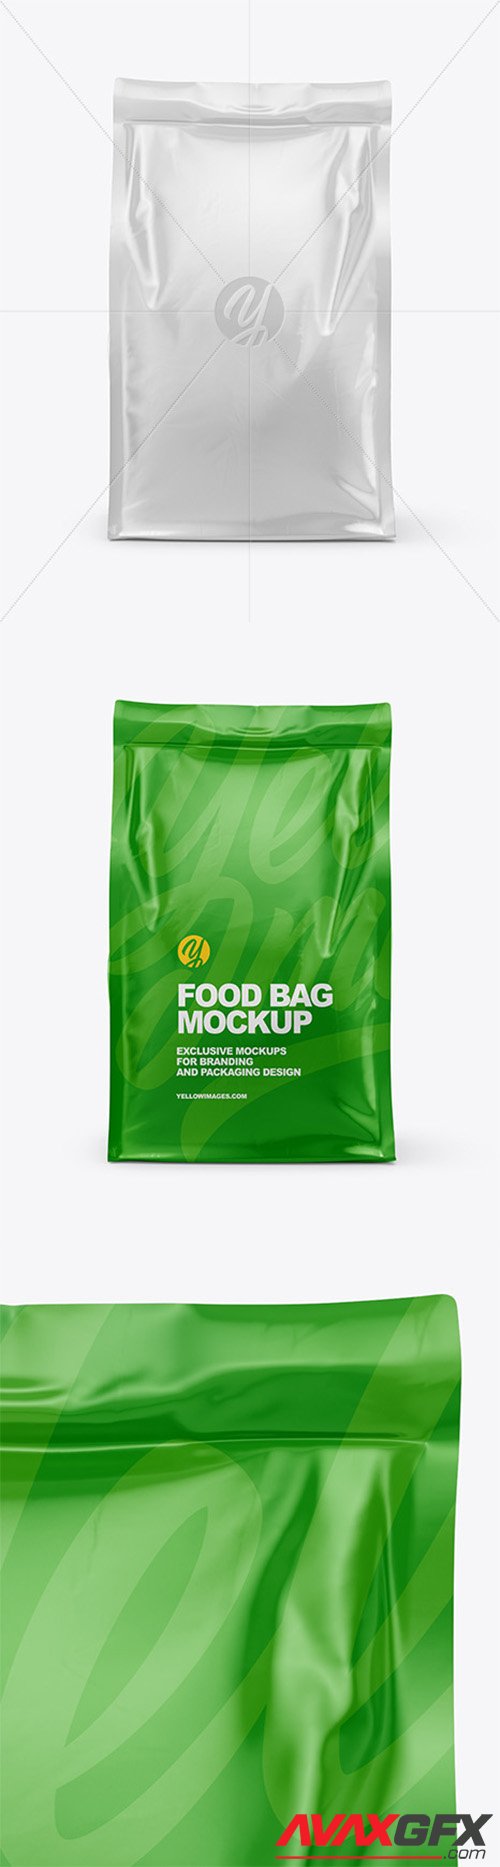 Download Glossy Food Bag Mockup Front View 64649 Avaxgfx All Downloads That You Need In One Place Graphic From Nitroflare Rapidgator PSD Mockup Templates